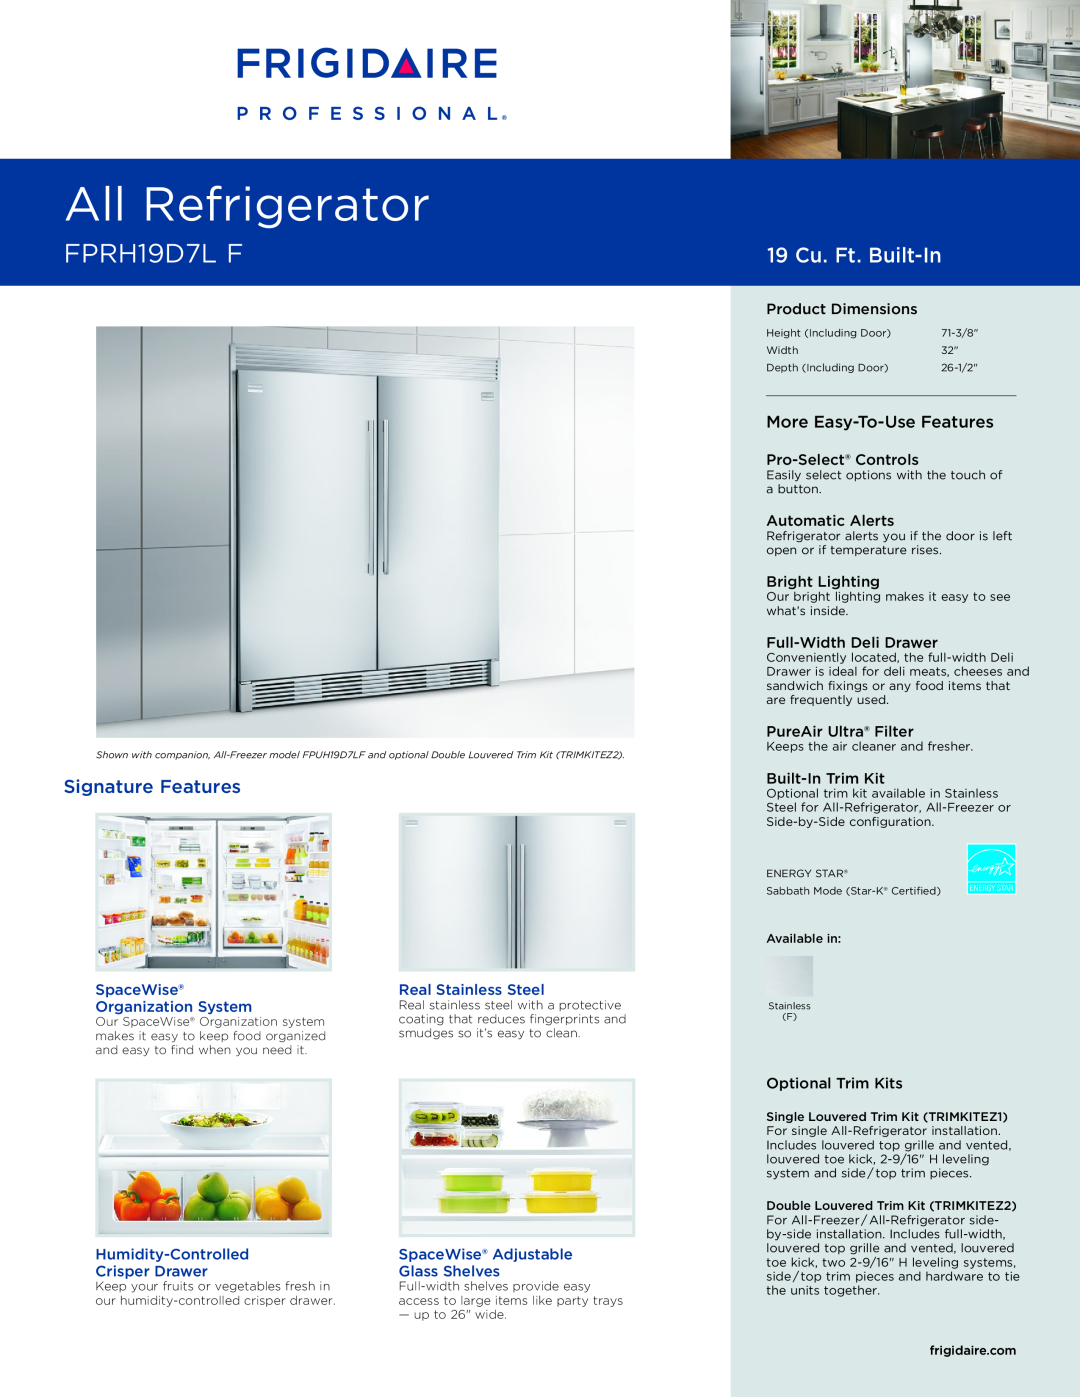 Frigidaire FPRH19D7L F dimensions SpaceWise, Real Stainless Steel, Organization System, Humidity-Controlled, Glass Shelves 